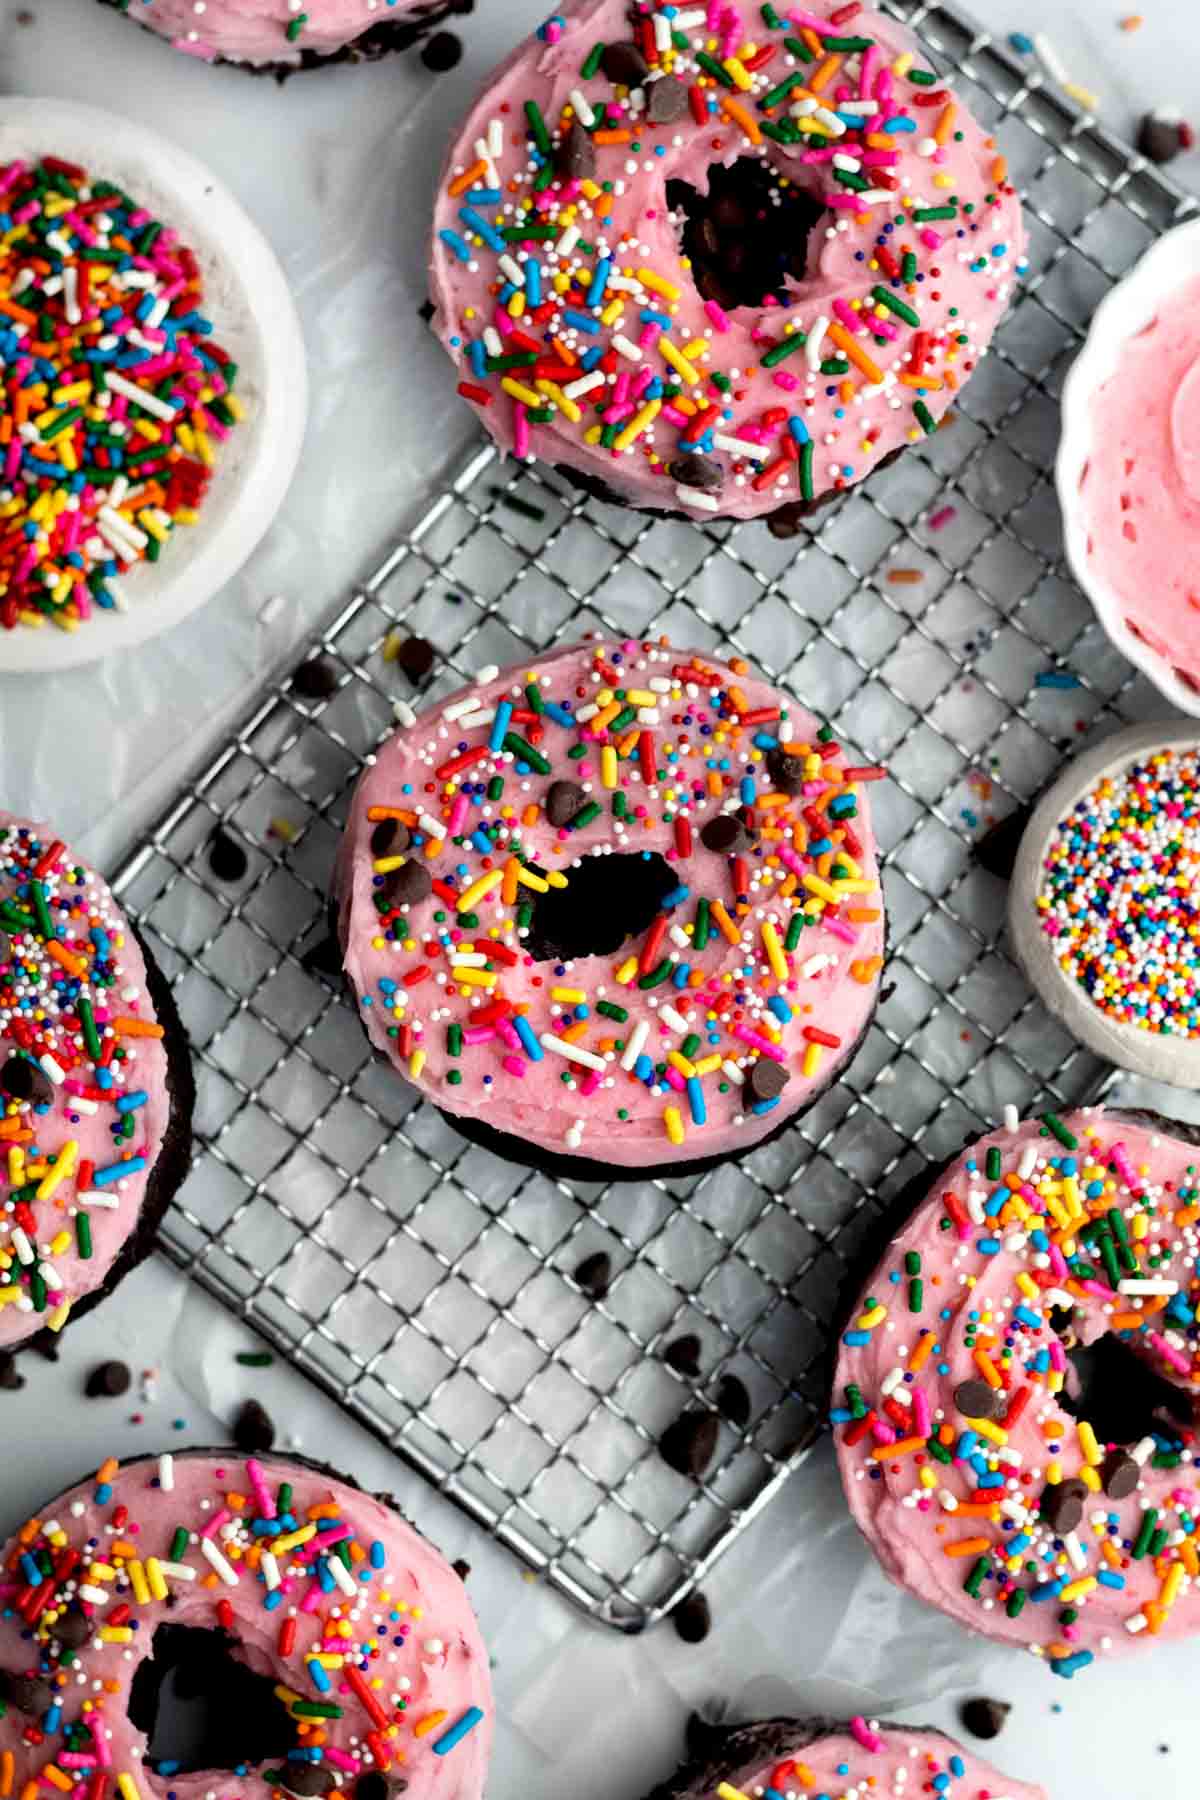 Looking down at pink raspberry frosted donuts with rainbow sprinkles.